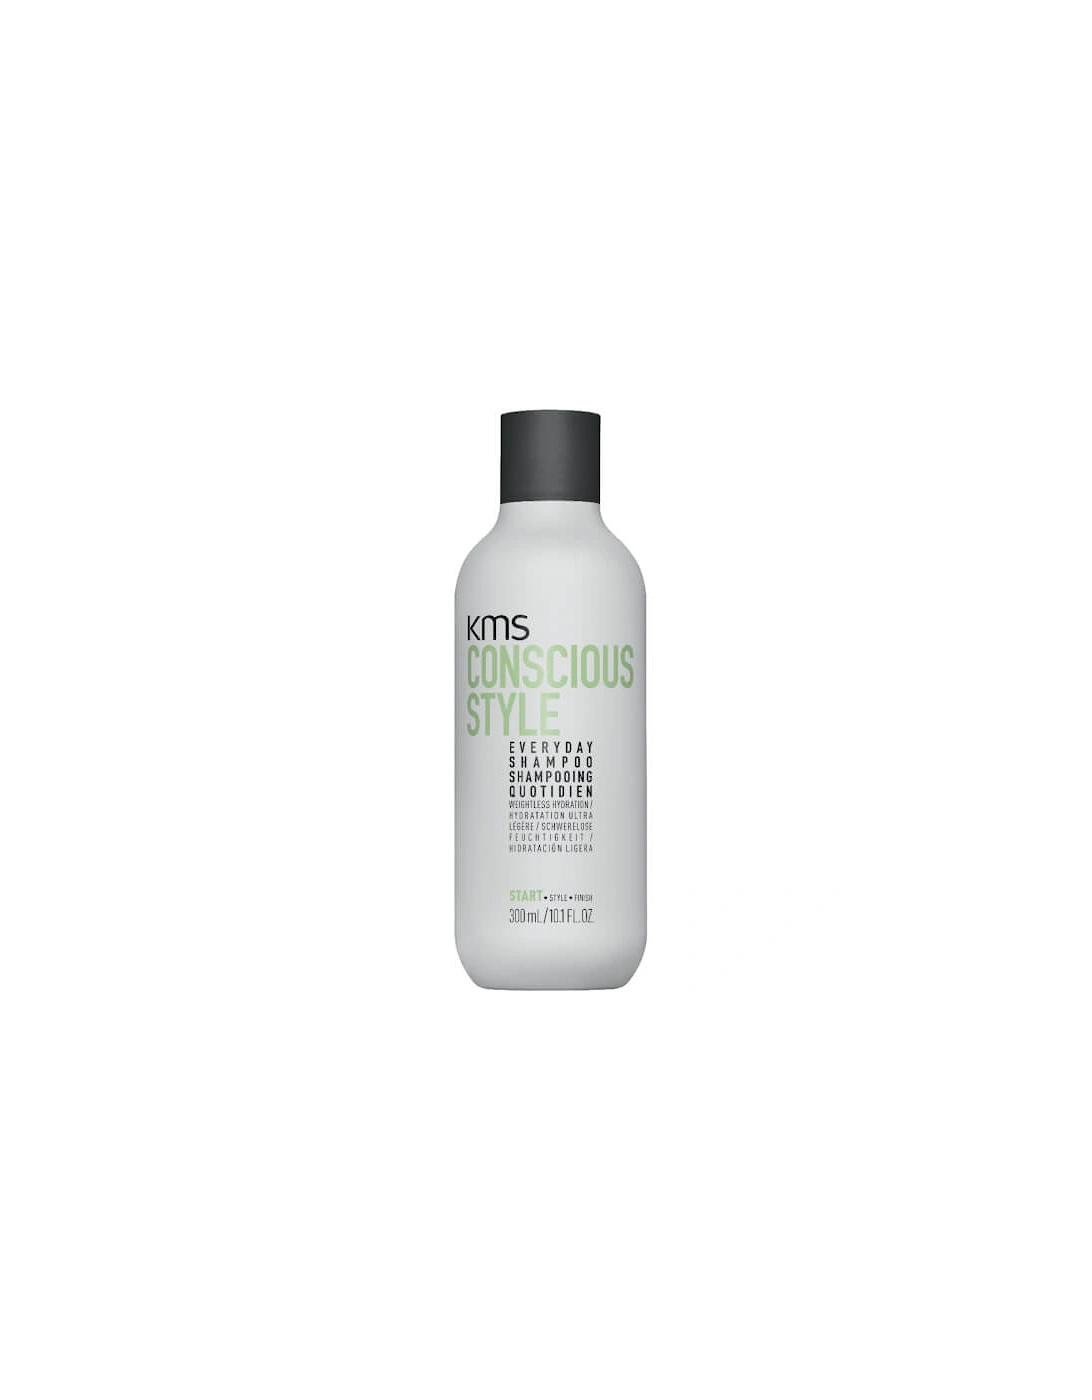 Conscious Style Everyday Shampoo 300ml - KMS, 2 of 1